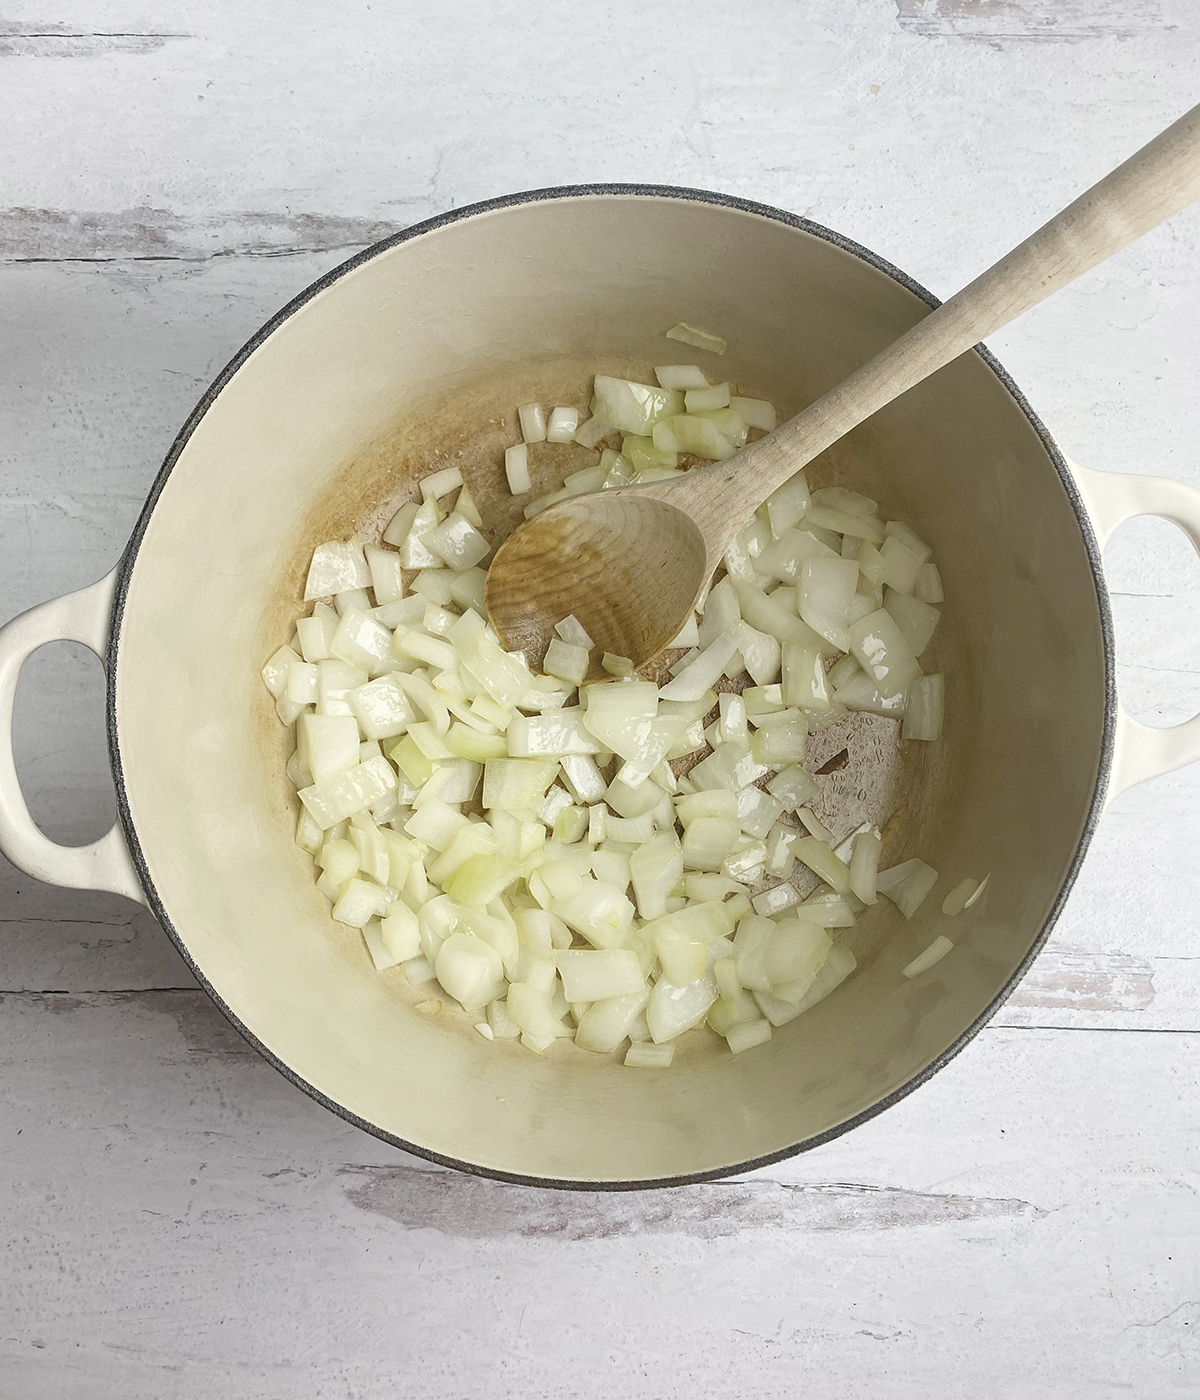 Sauteed onions in a pot.